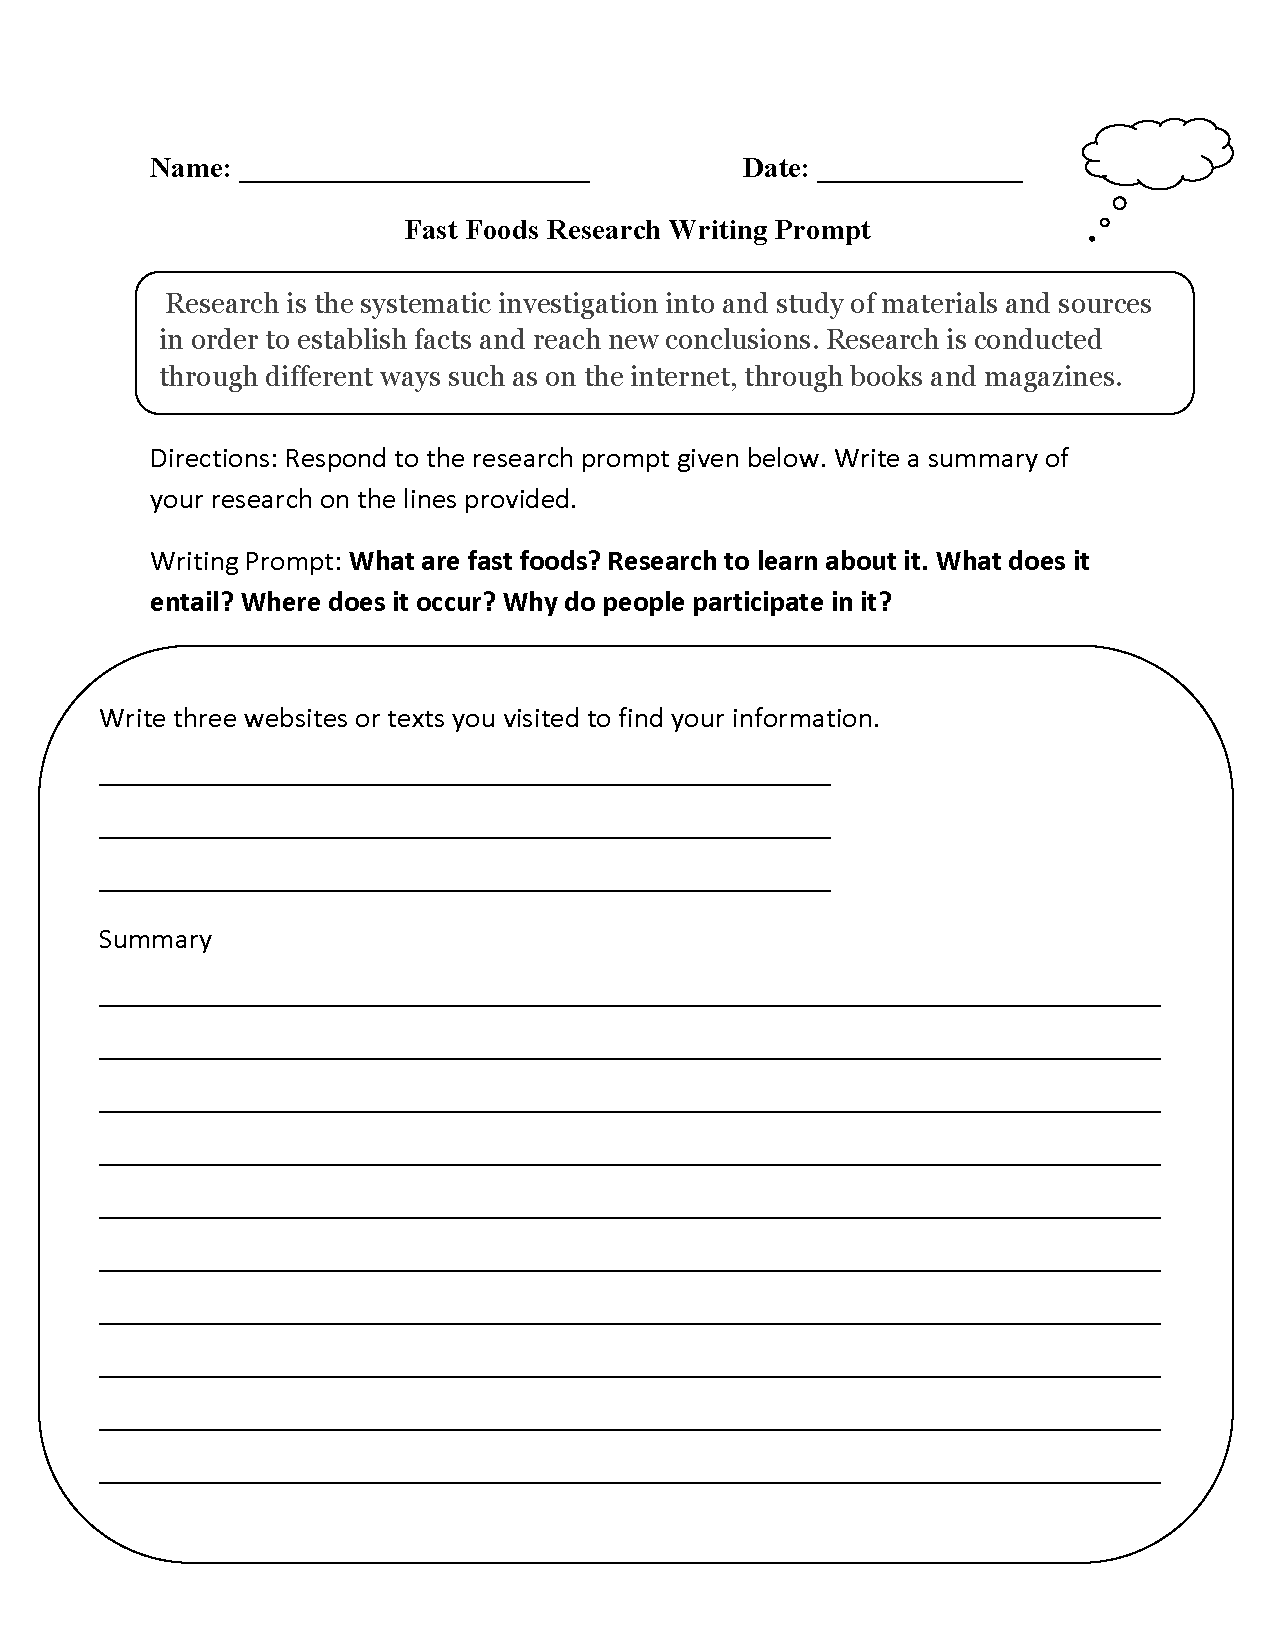 Fast Foods Research Writing Prompts Worksheet